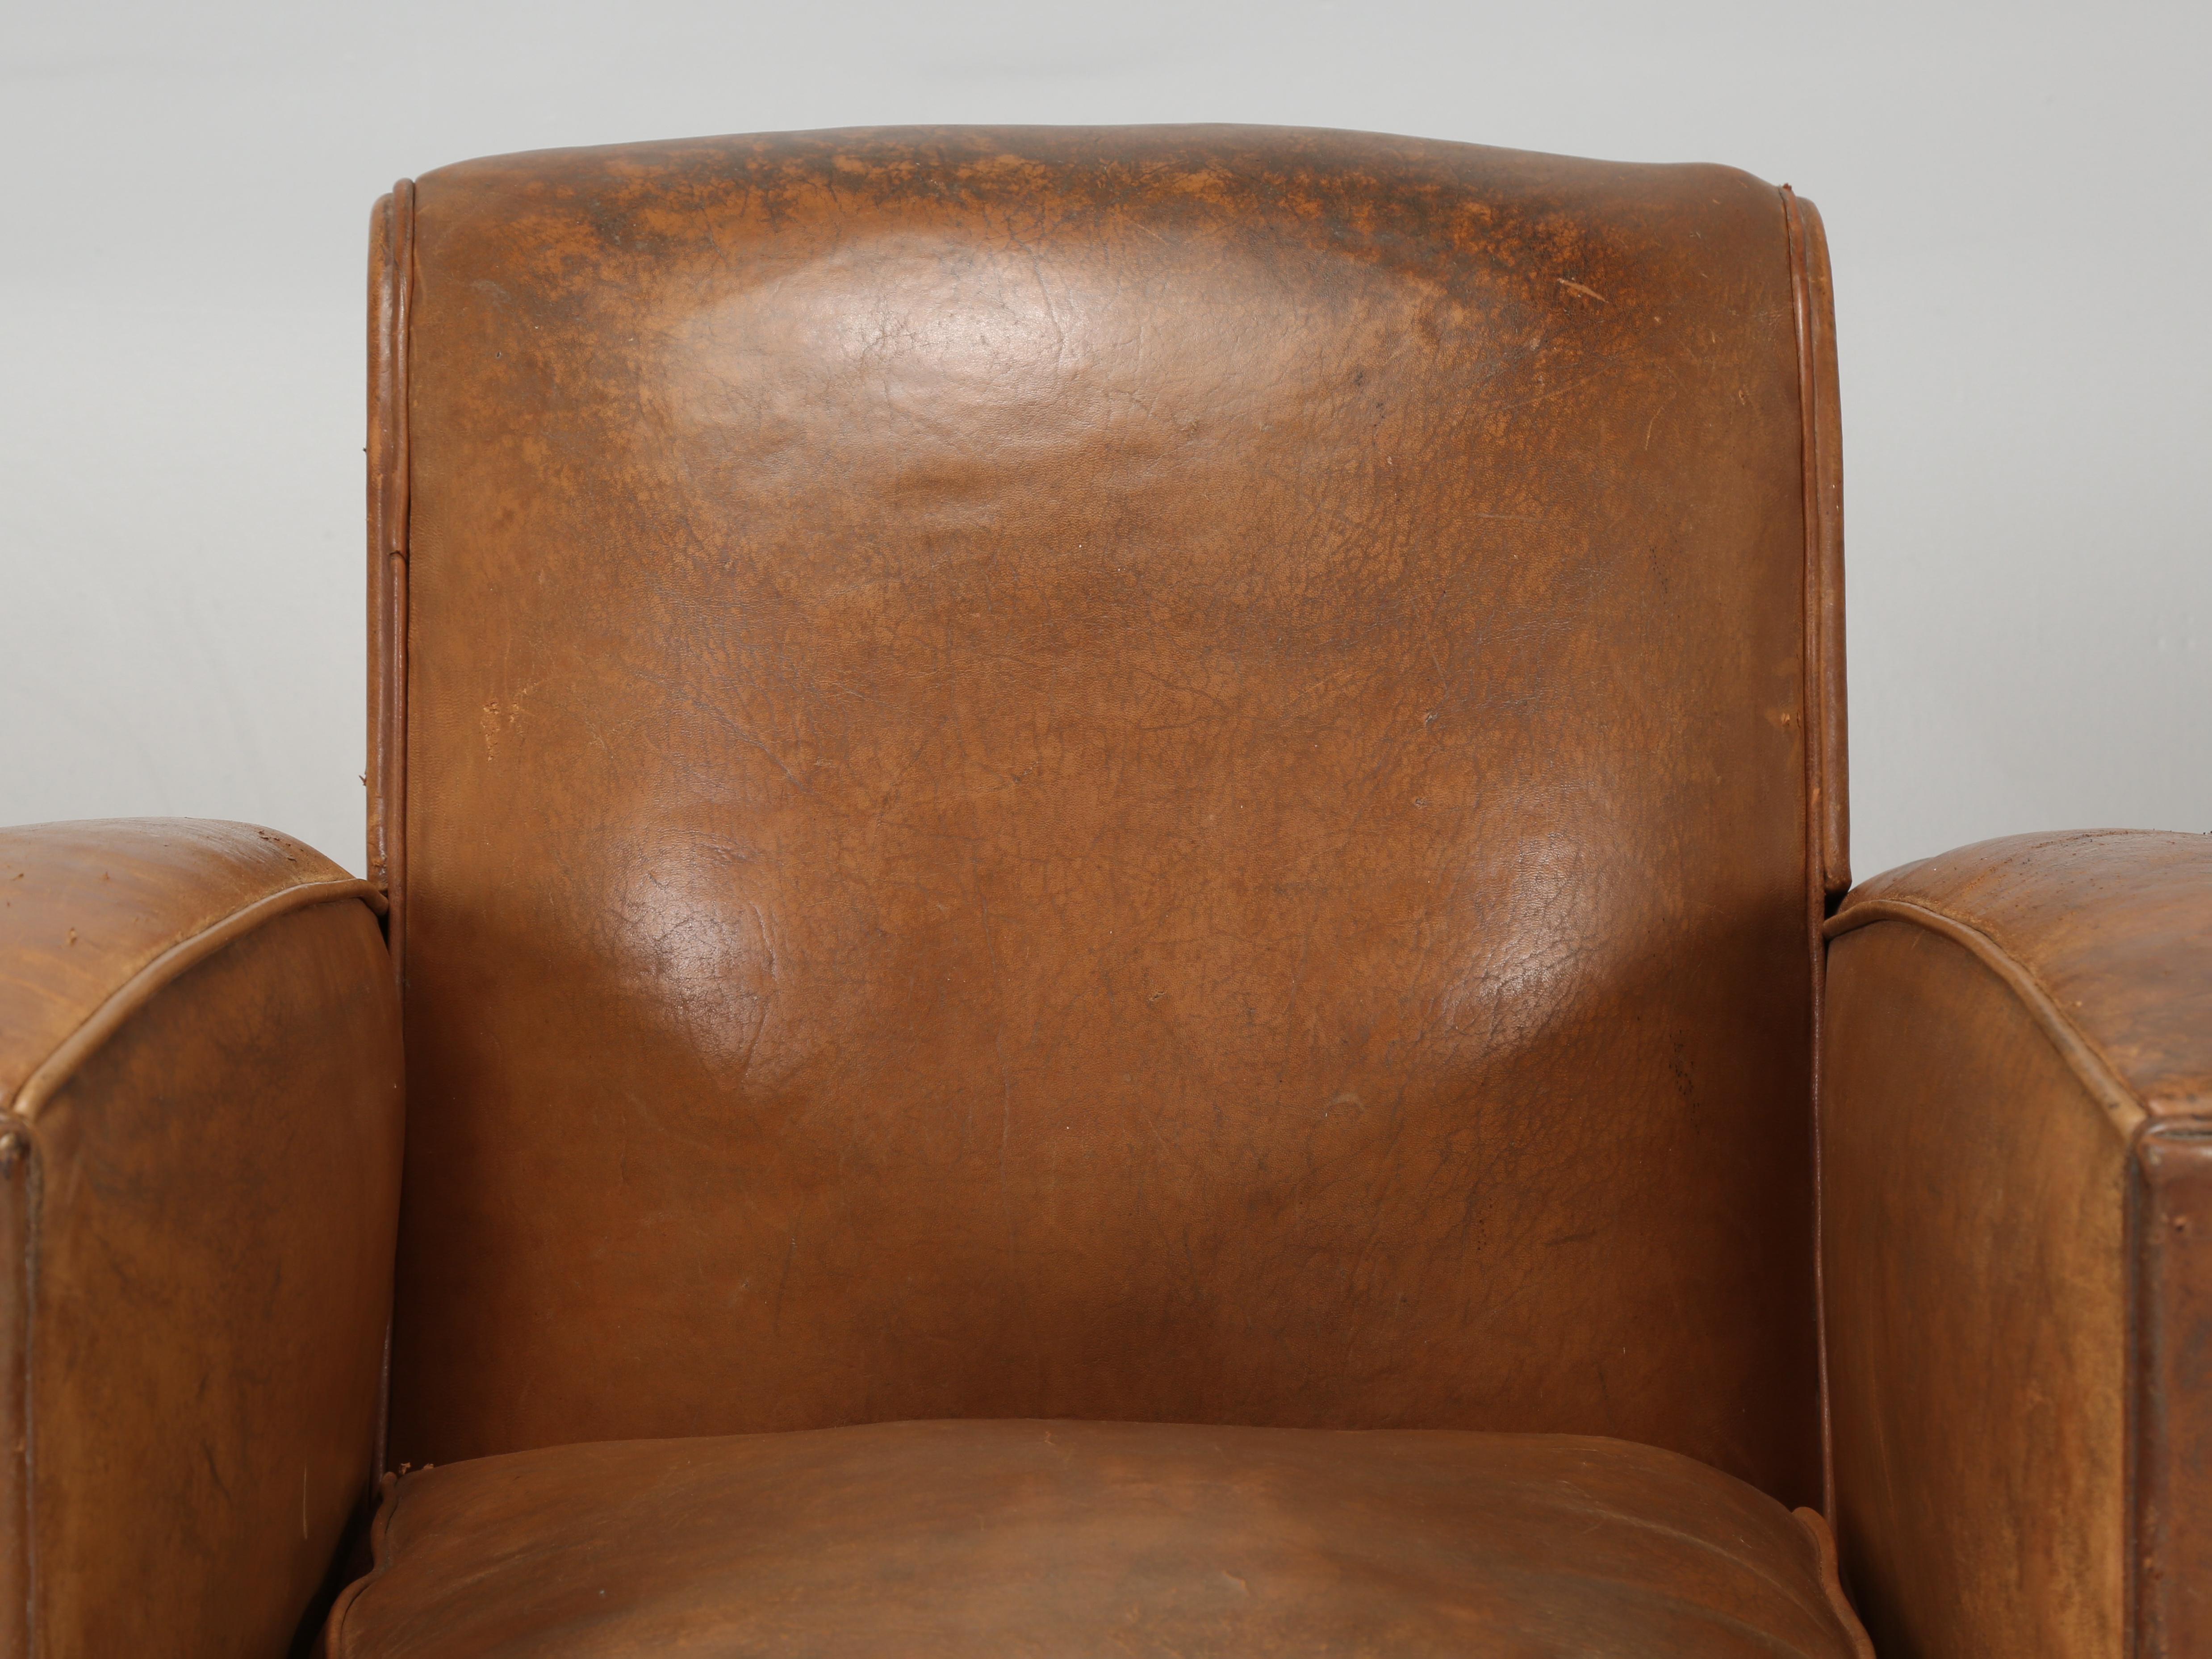 Early 20th Century French Leather Club Chairs Unrestored Cosmetically Completely Restored Interiors